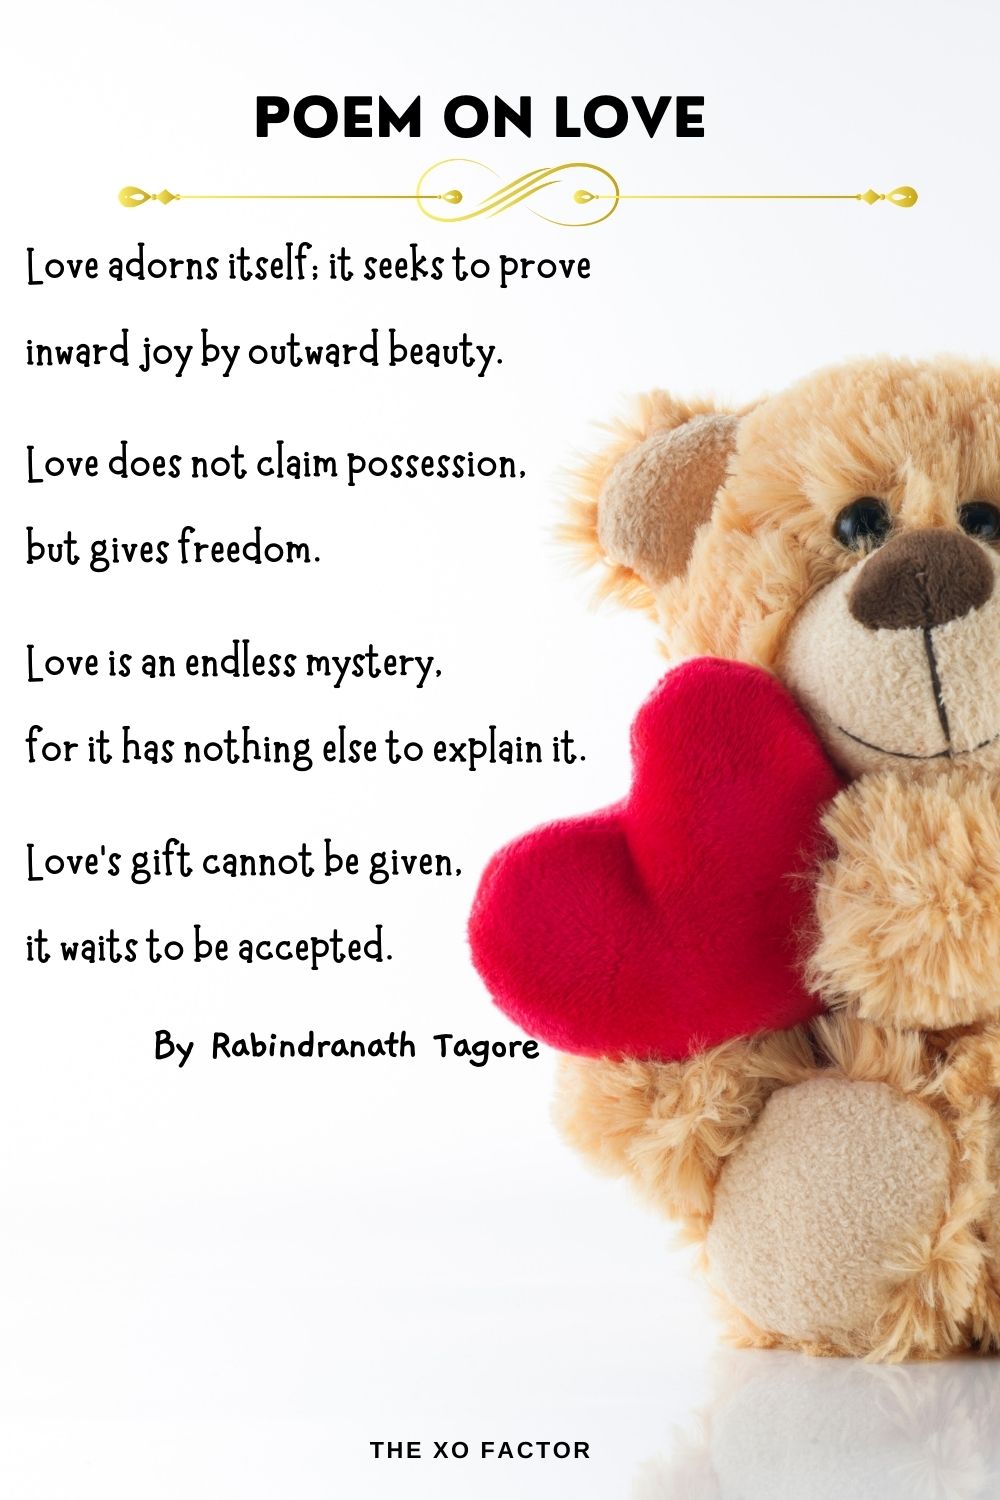 Poems On Love Poem by Rabindranath Tagore